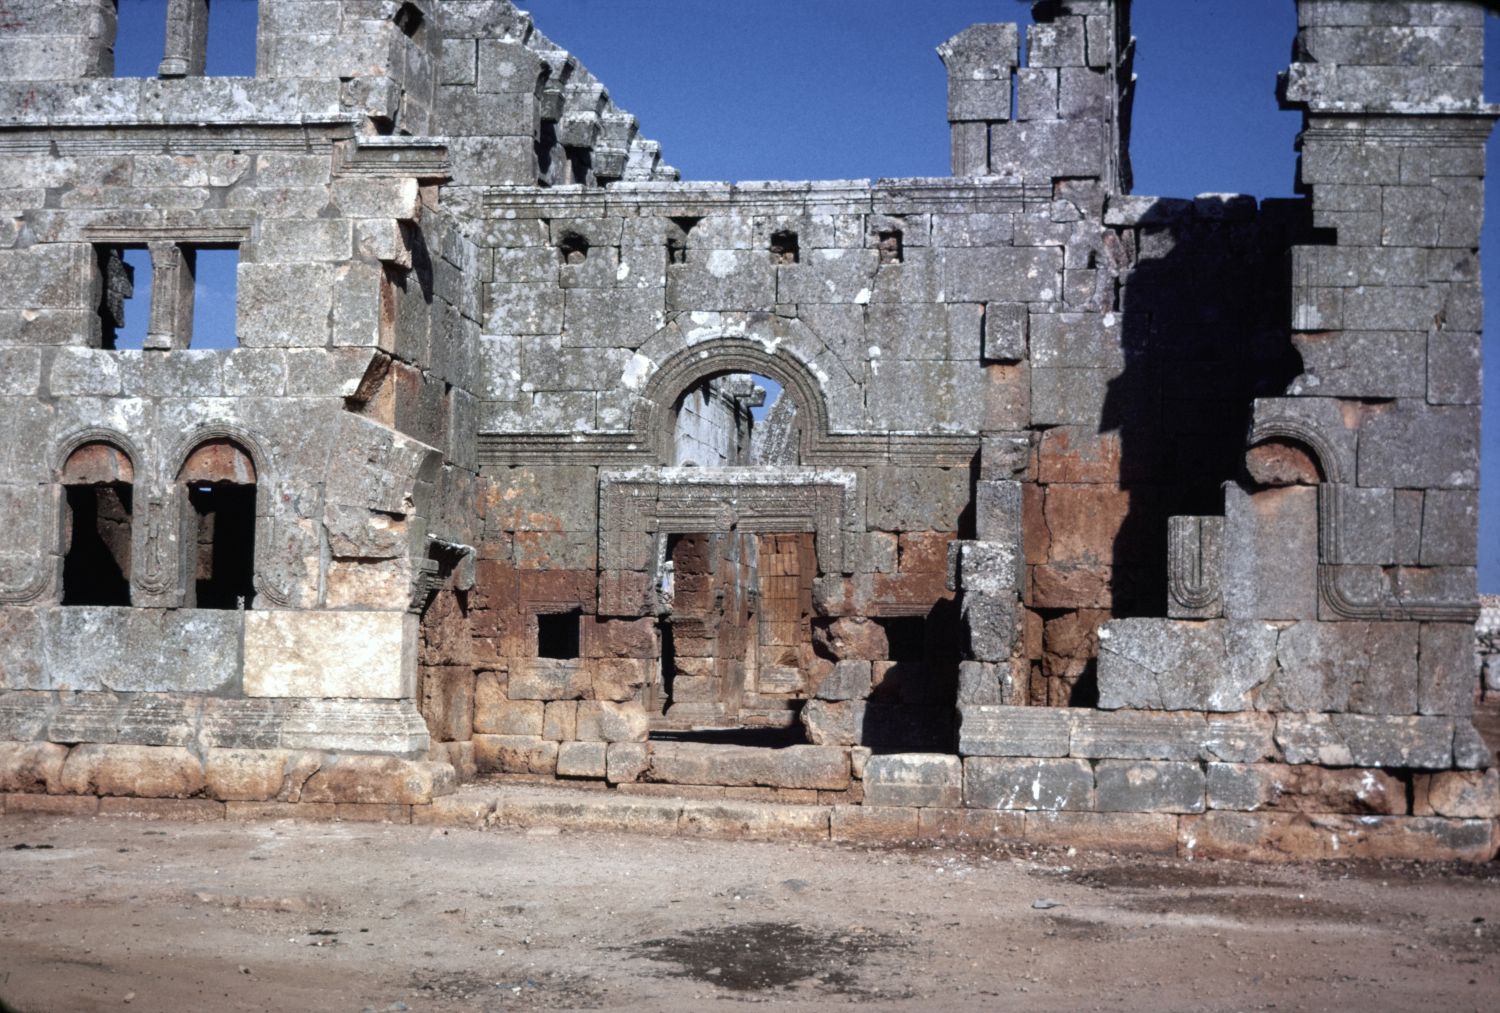 Exterior view of west facade, showing remnants of main portal.